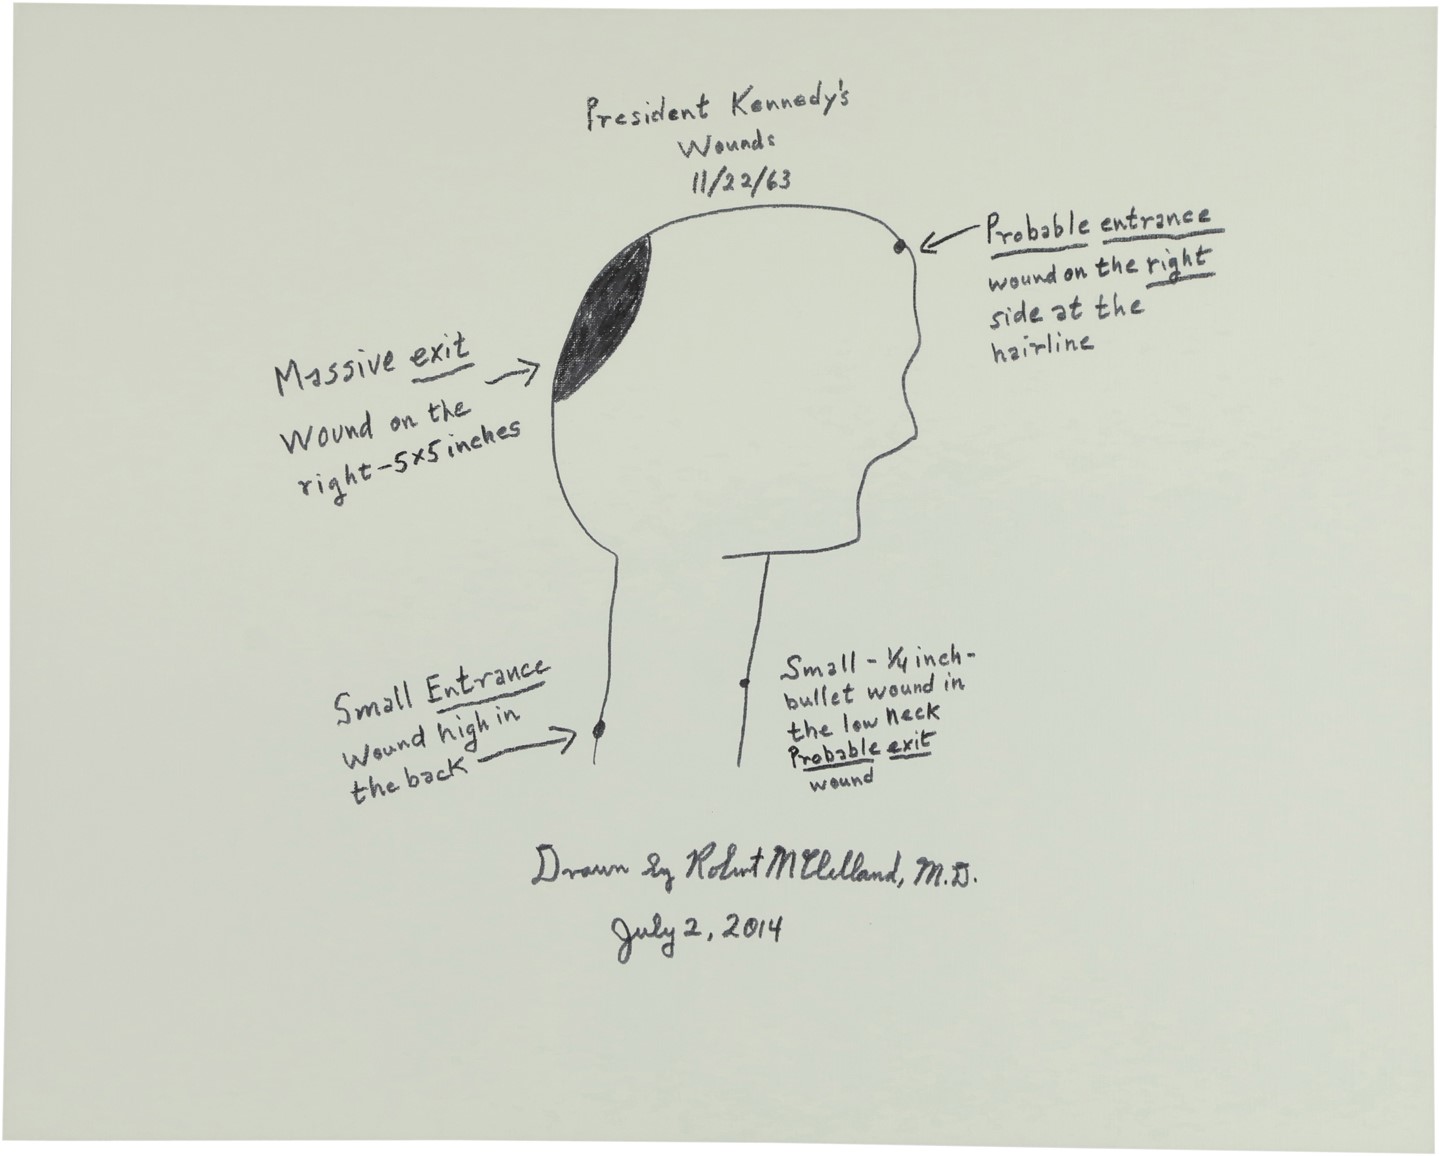 - "President Kennedy's Wounds" Hand Drawn Diagram by Dr. Robert McClelland